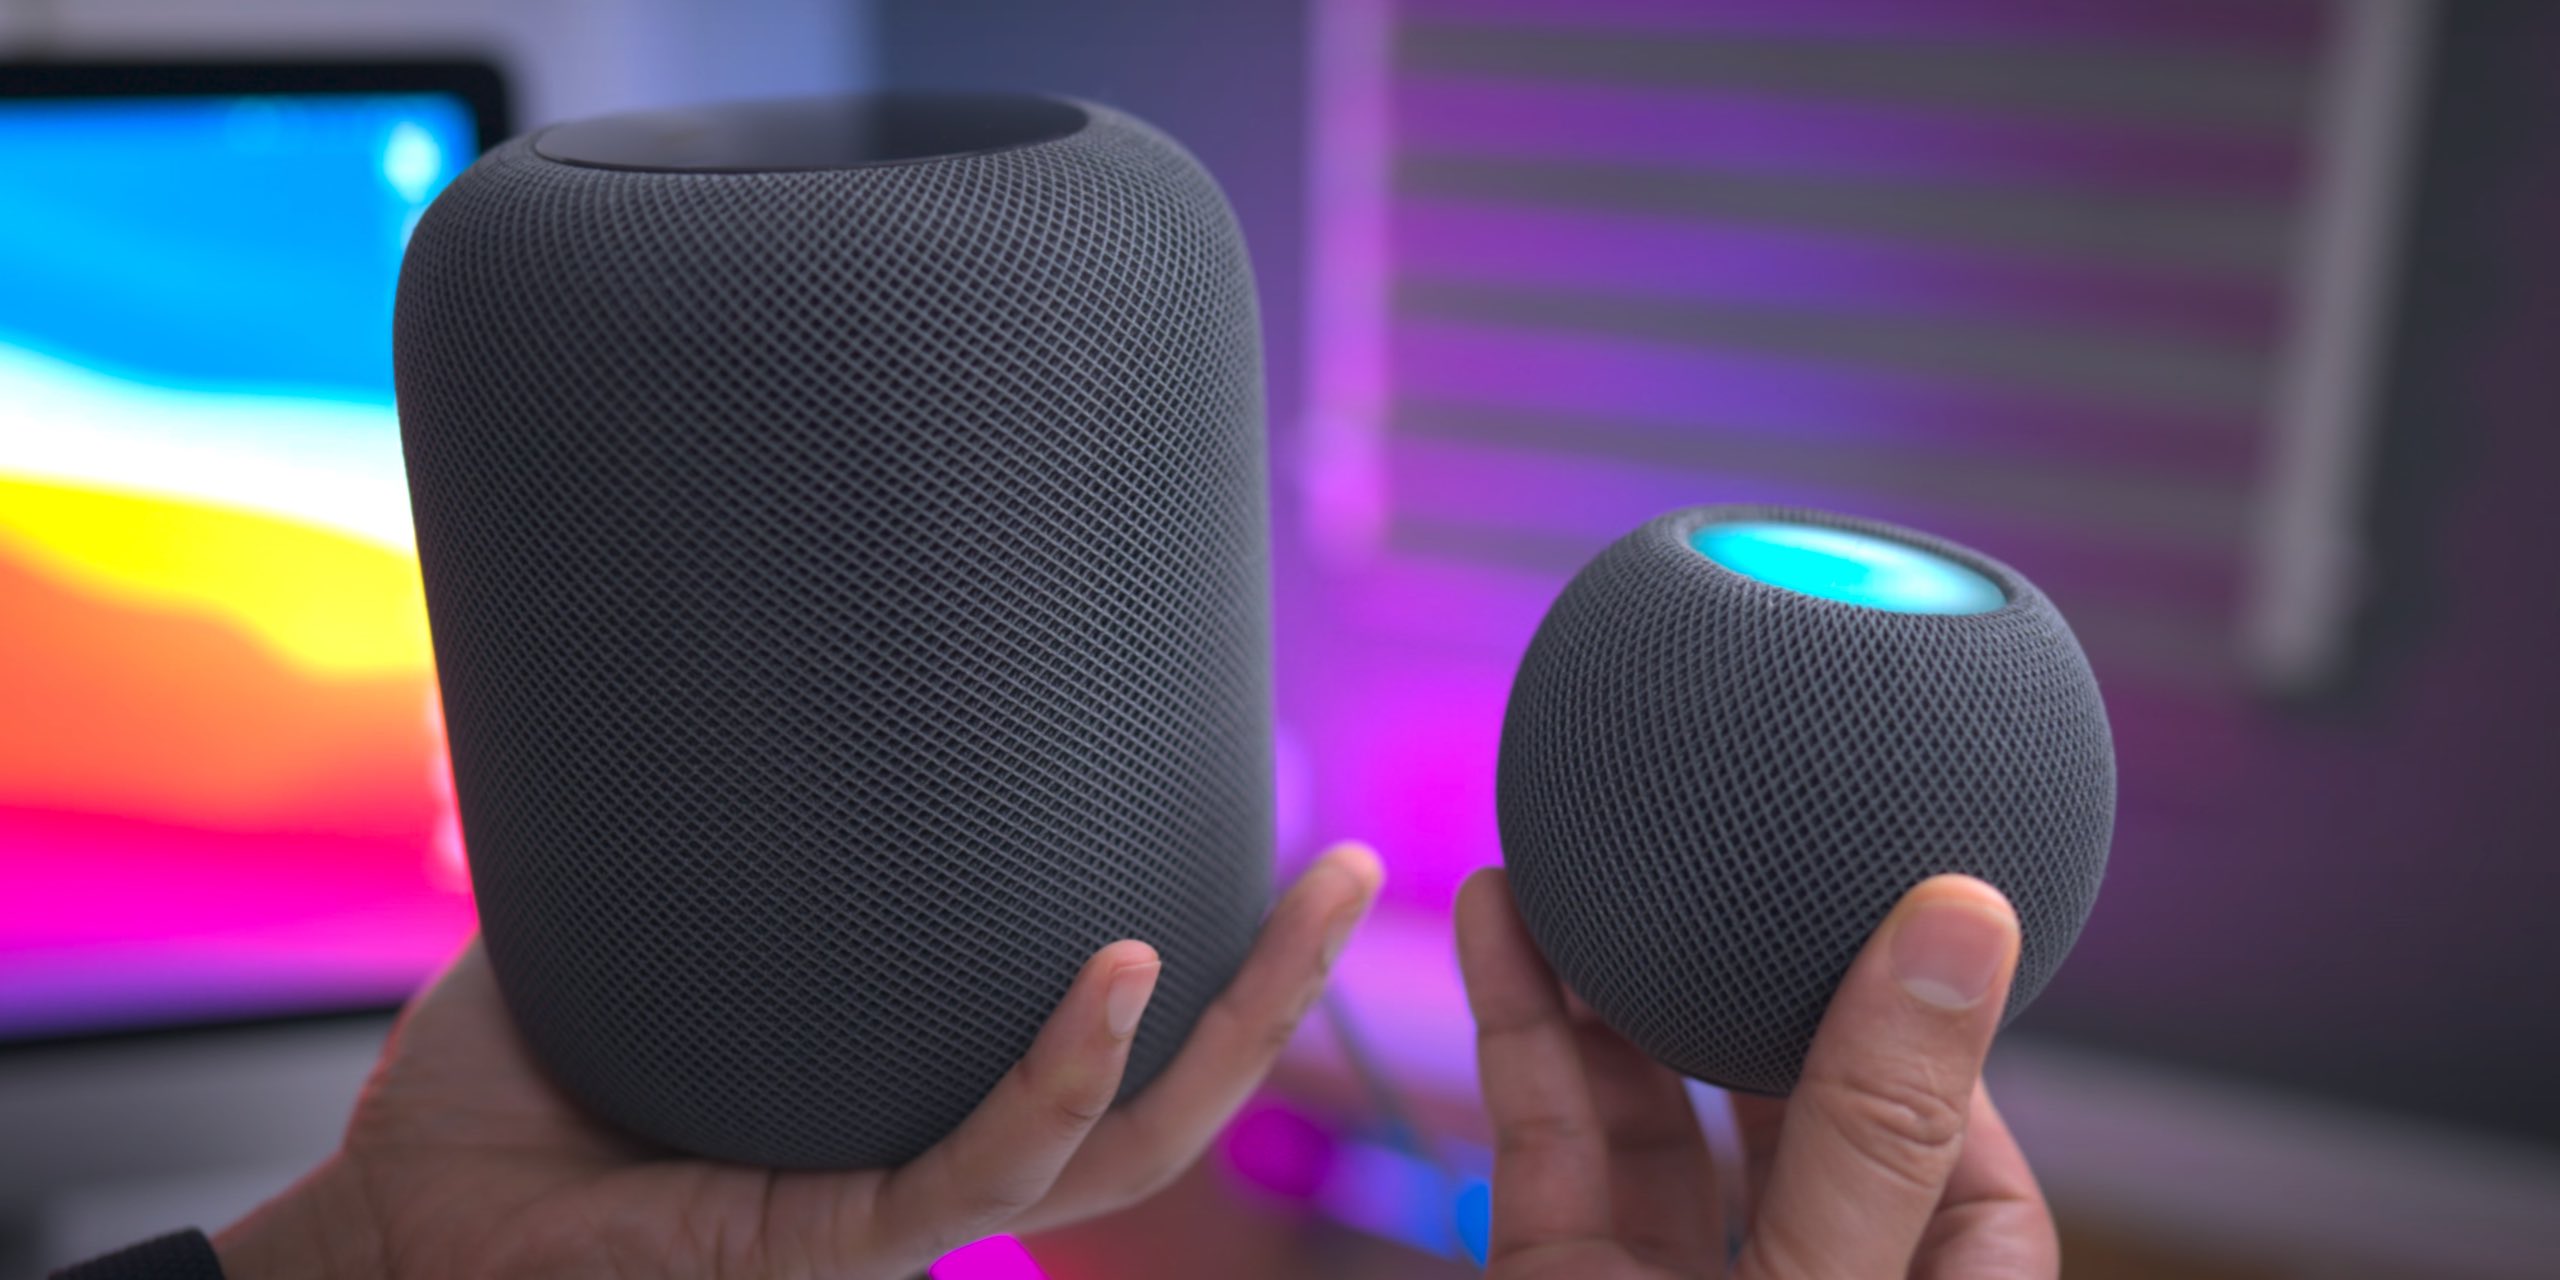 HomePod bug: How to fix the set up or update issue - 9to5Mac